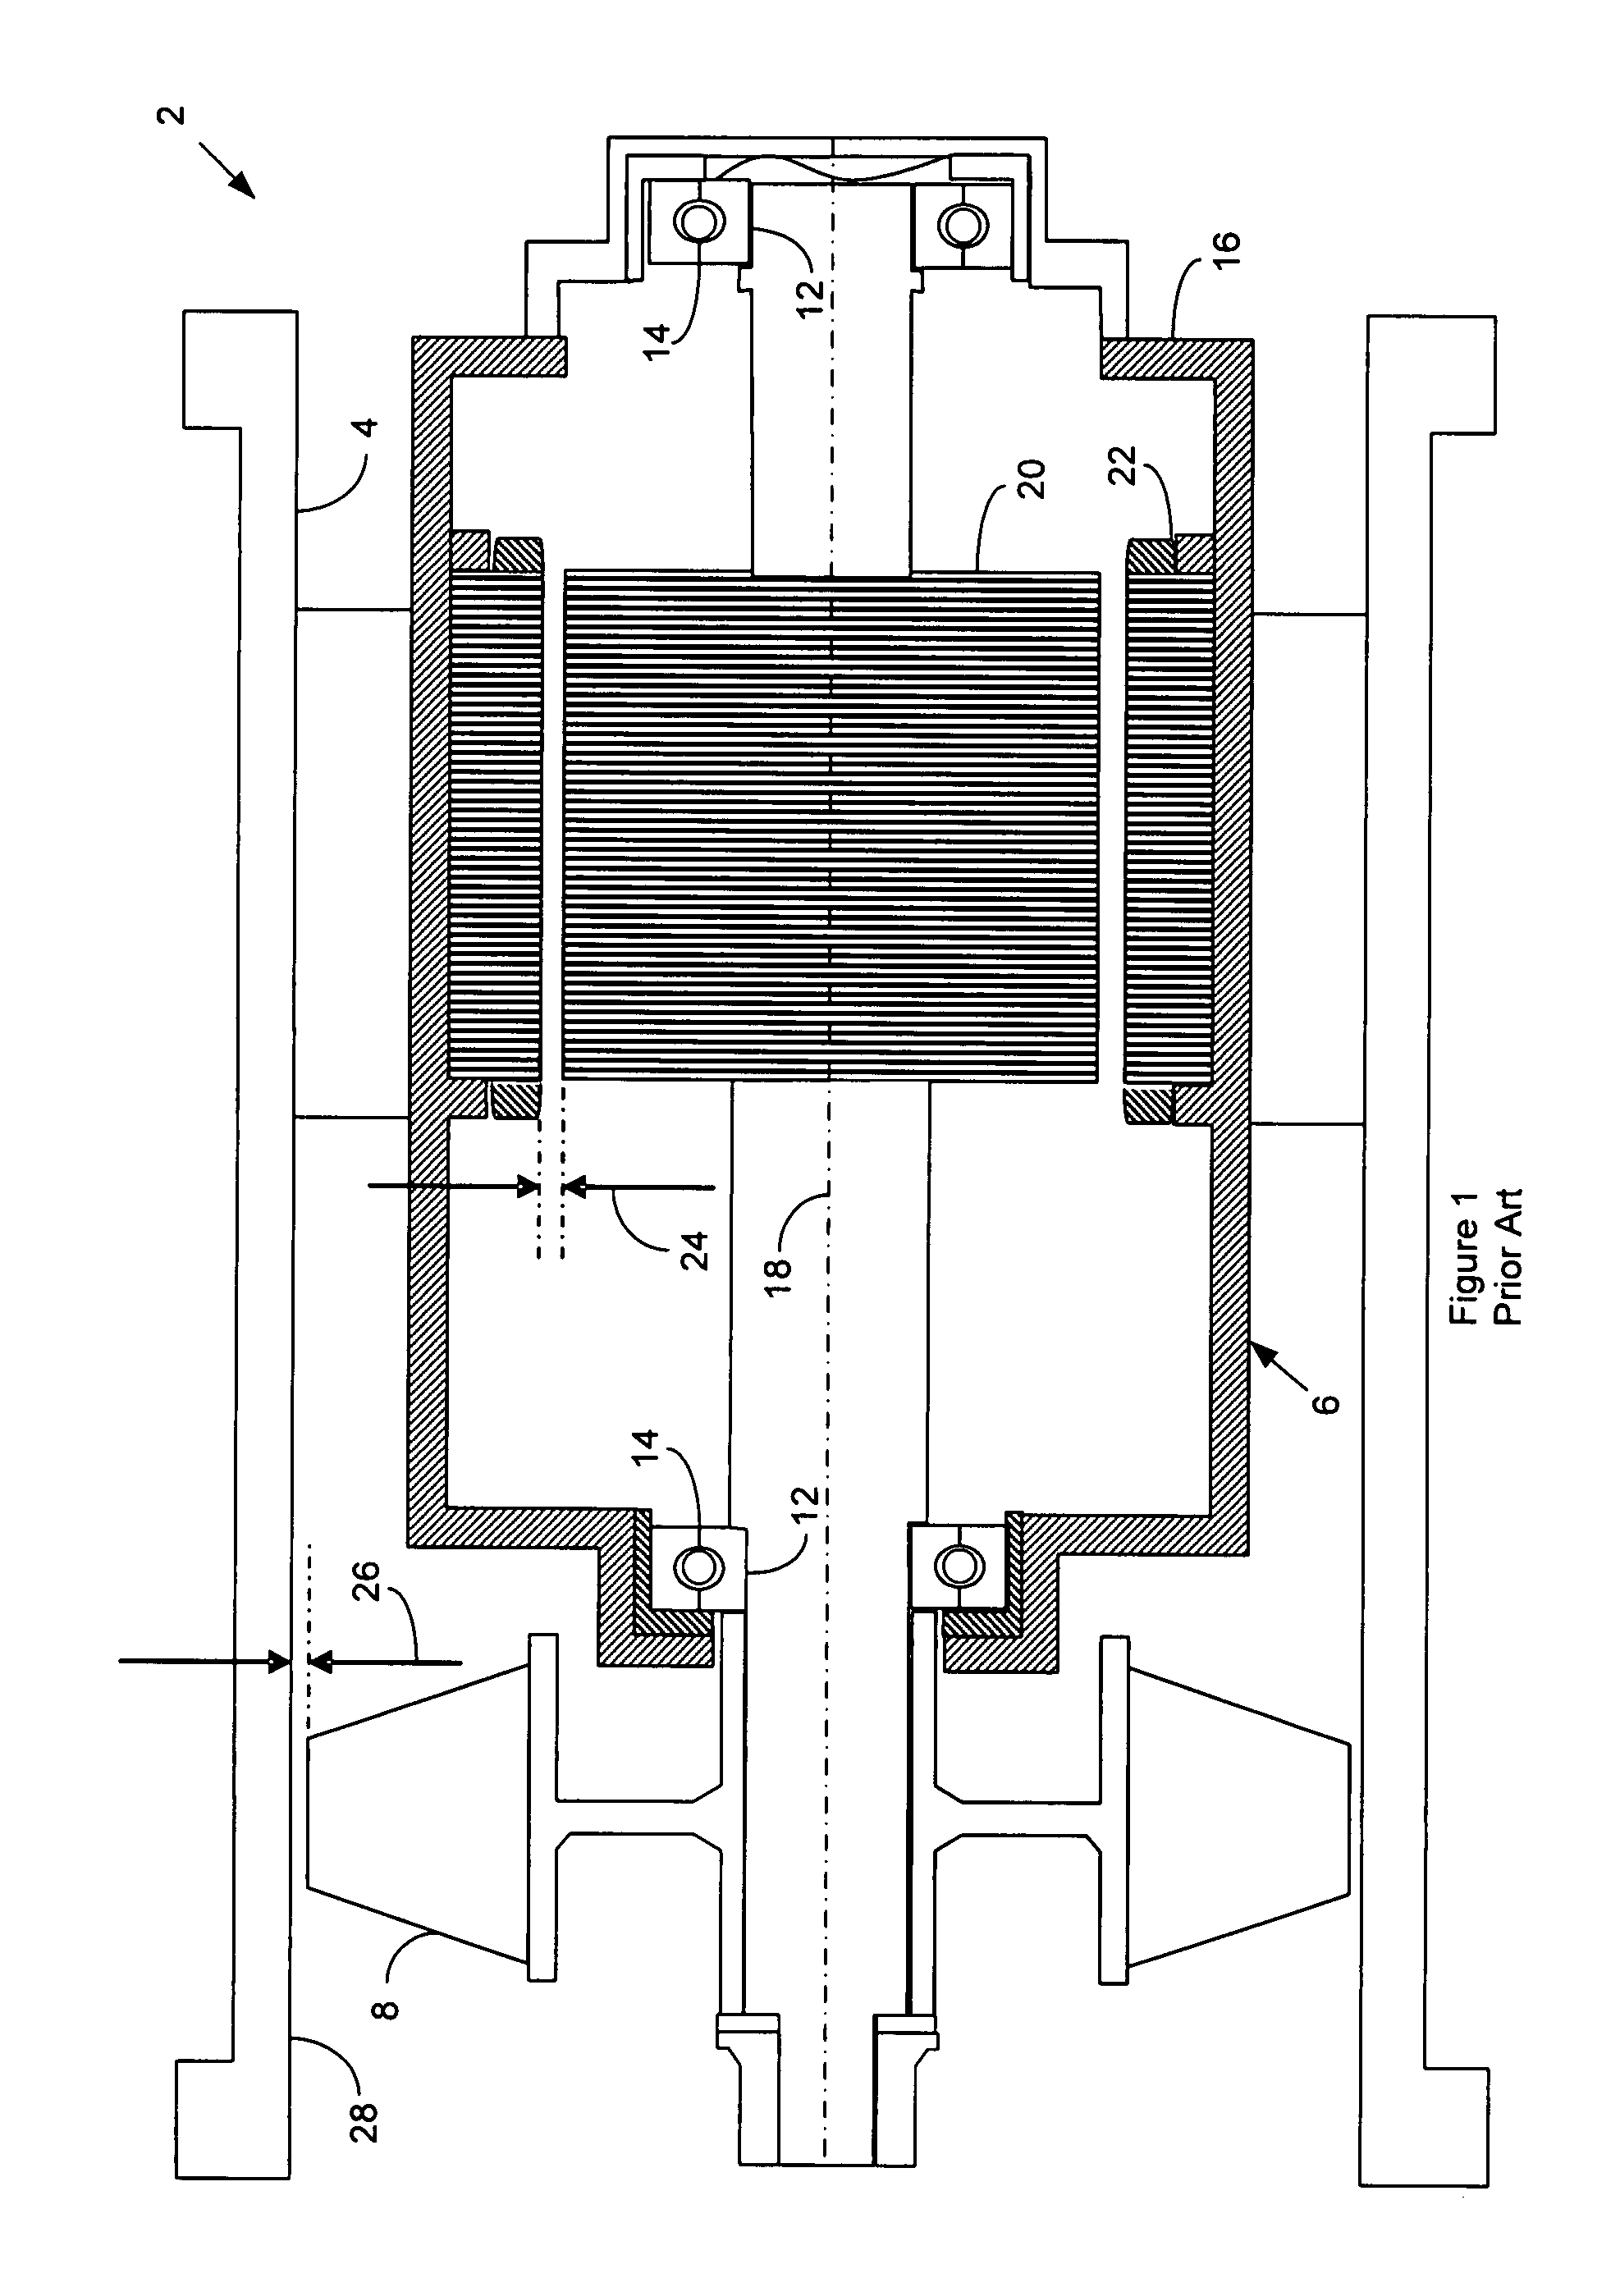 Auxiliary rotary bearing system